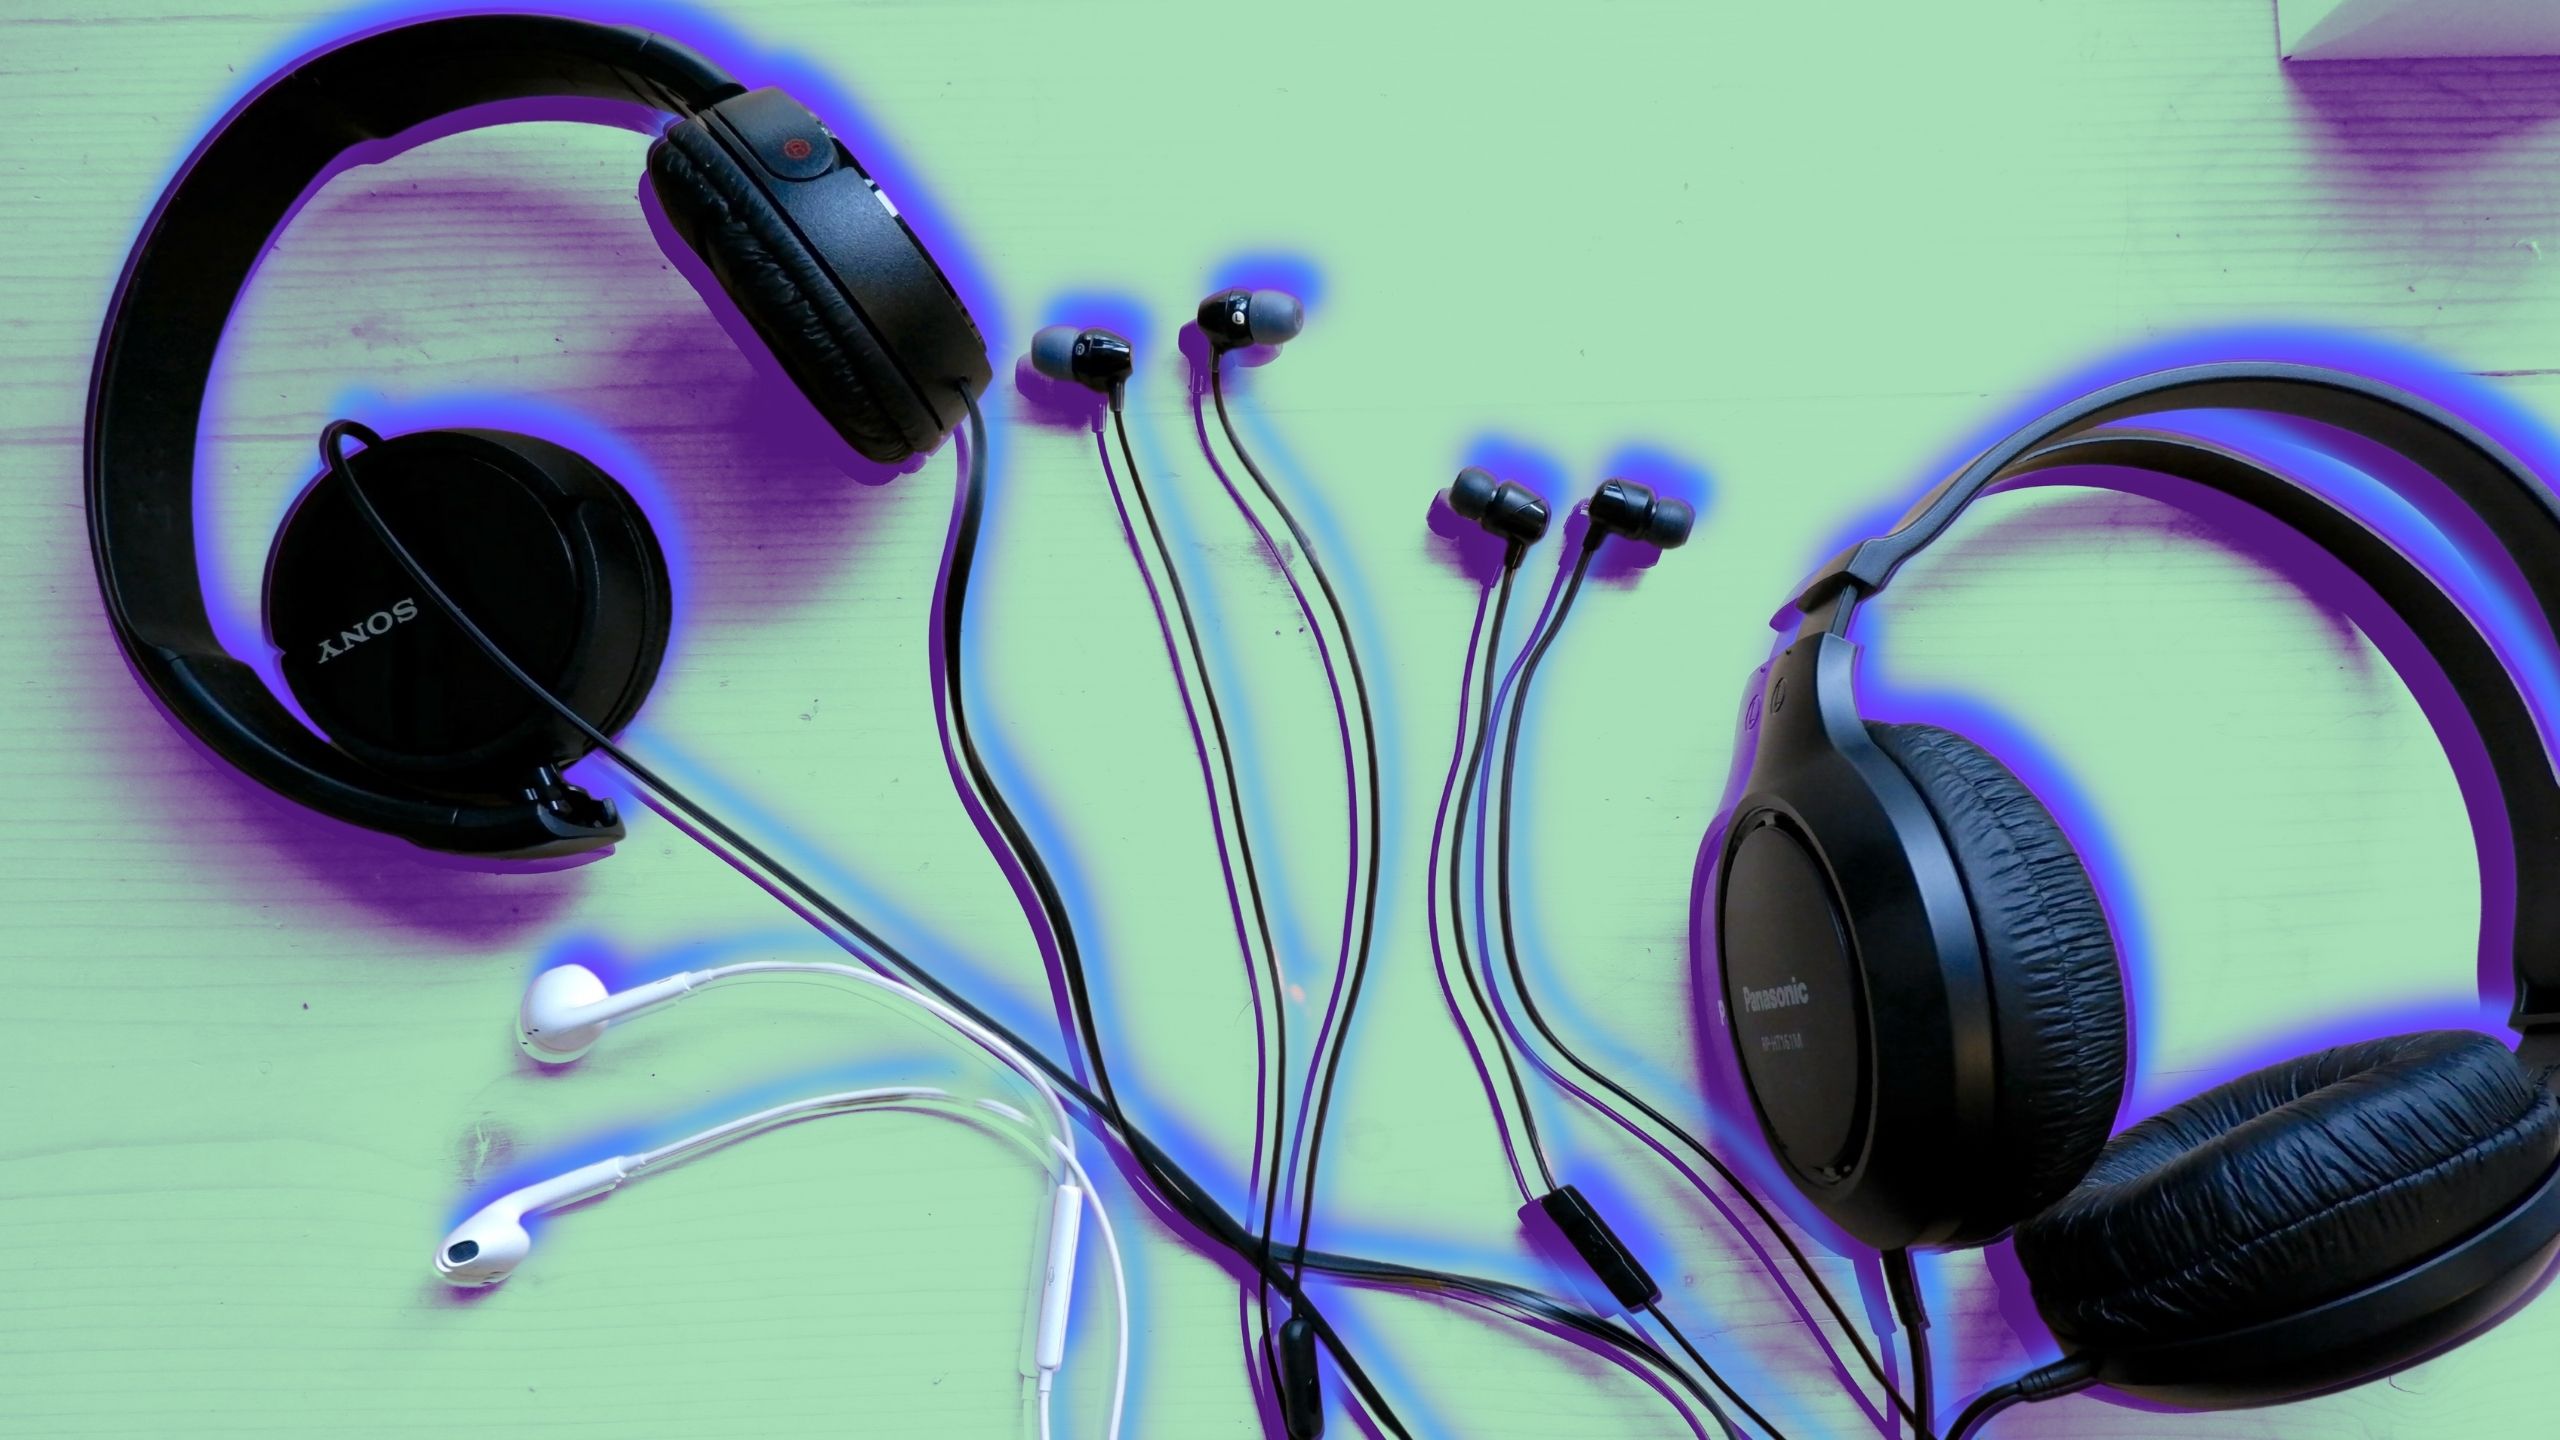 I tested the 5 best-selling wired headphones so you don’t have to